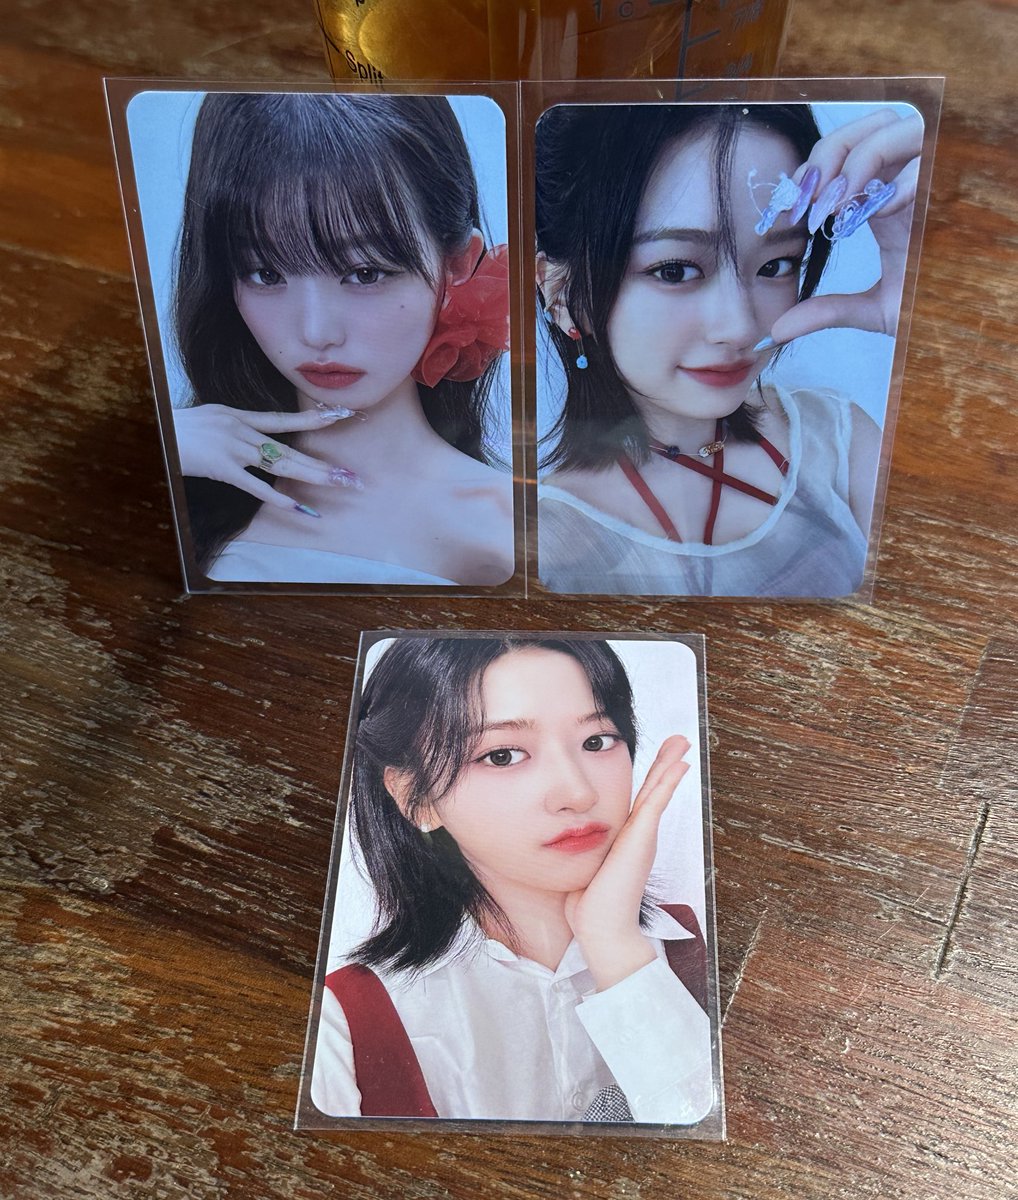 my current favorite annyeongz album pc (i will also get loved ive wonyoung so loved ive yujin won’t be alone anymore)